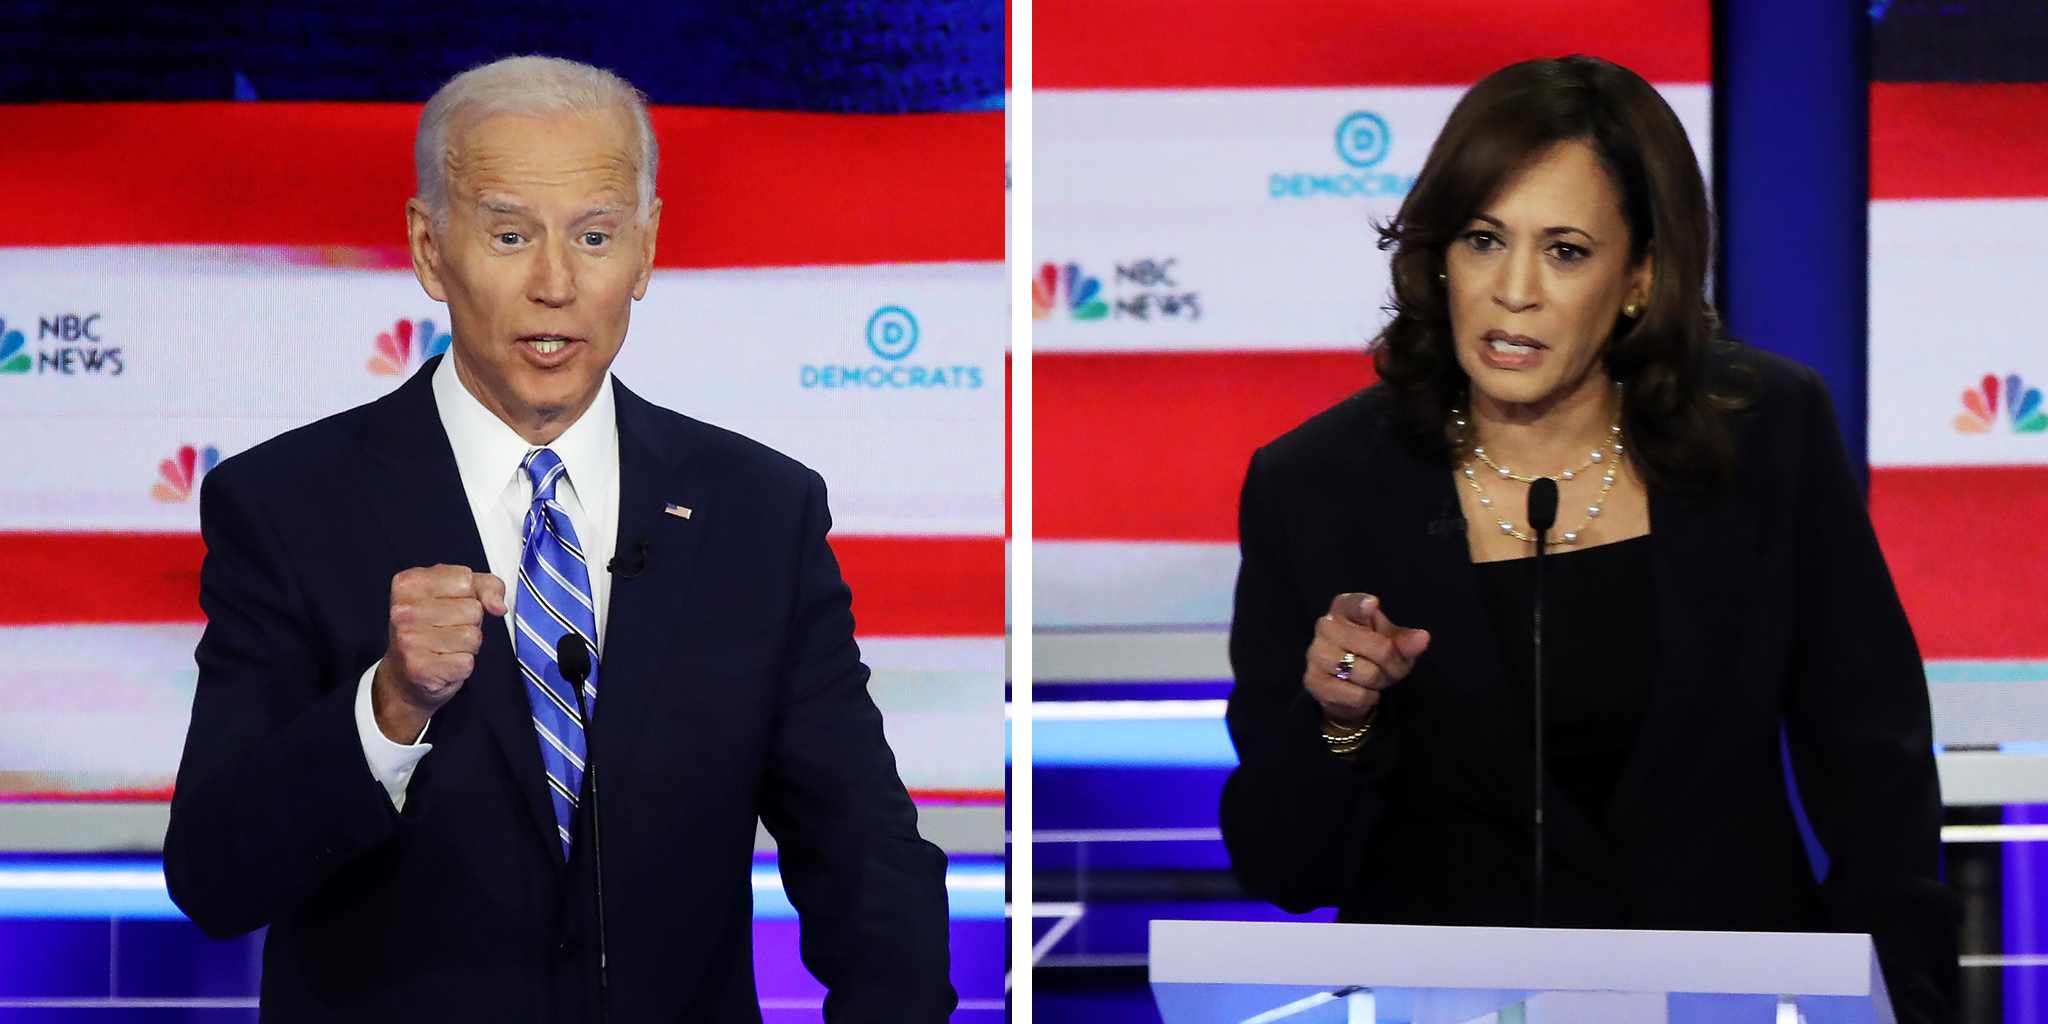 Former Vice President Joe Biden and California Sen. Kamala Harris participate during the second Democratic primary debate of the 2020 presidential campaign season hosted by NBC News at the Adrienne Arsht Center for the Performing Arts in Miami, Florida, June 27, 2019. (Saul Loeb—AFP/Getty Images)